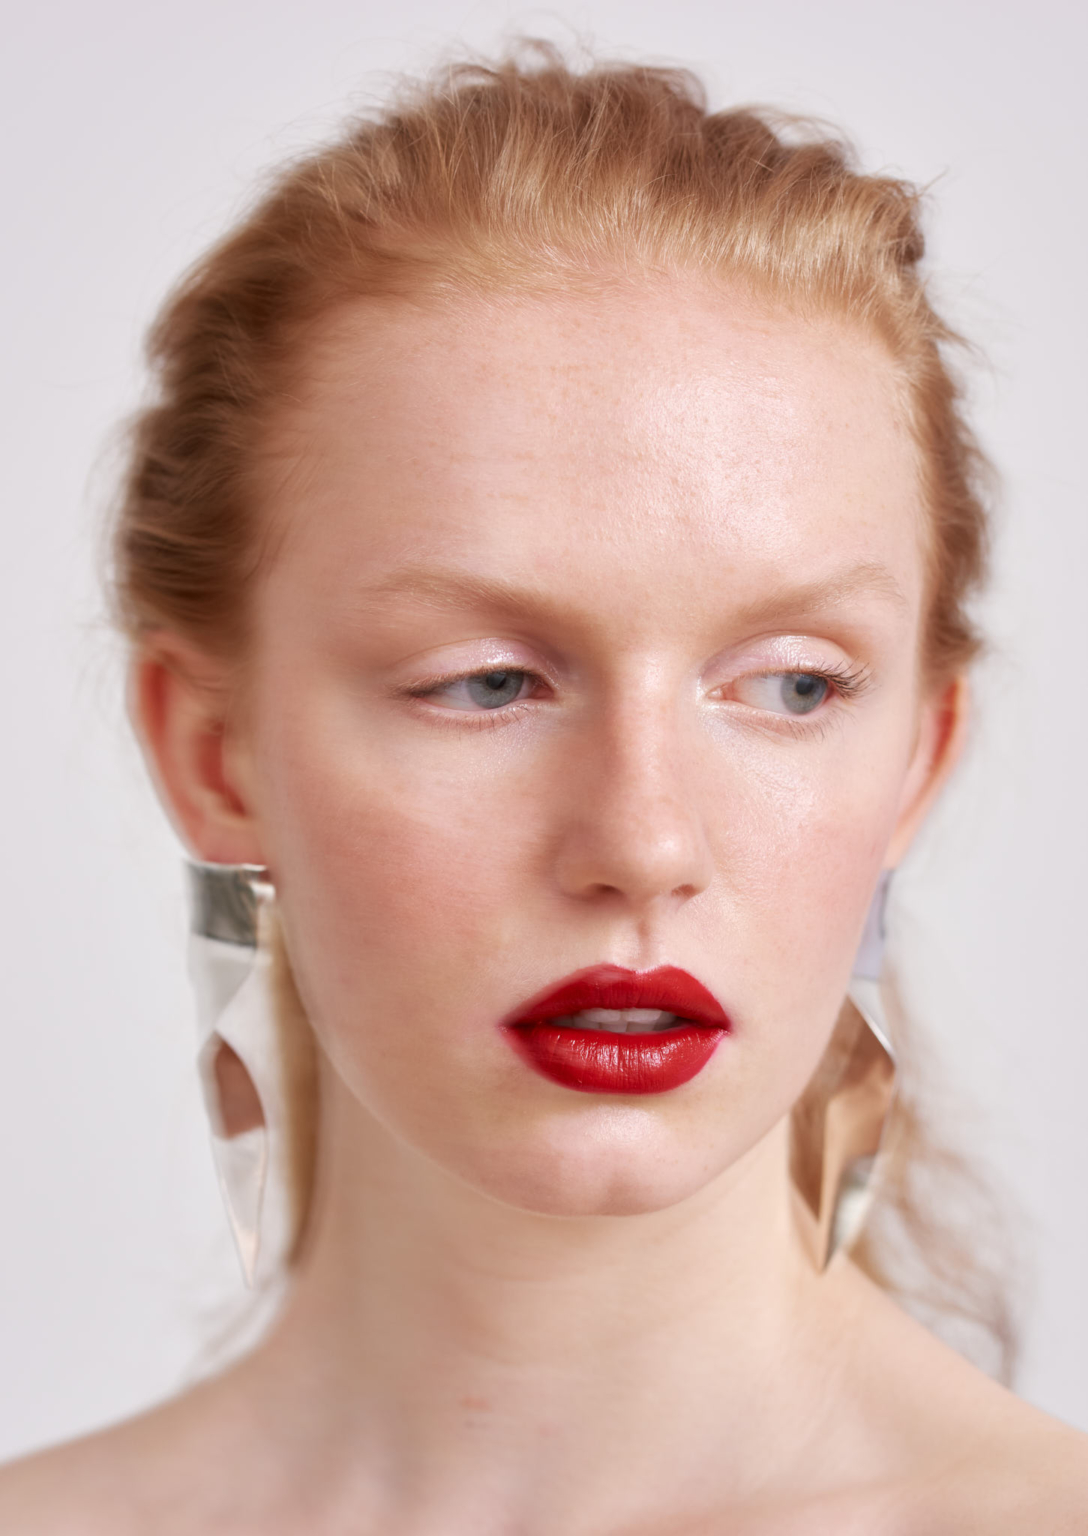 A Natural Beauty by Stephanie Geddes for Flanelle Magazine | Flanelle ...